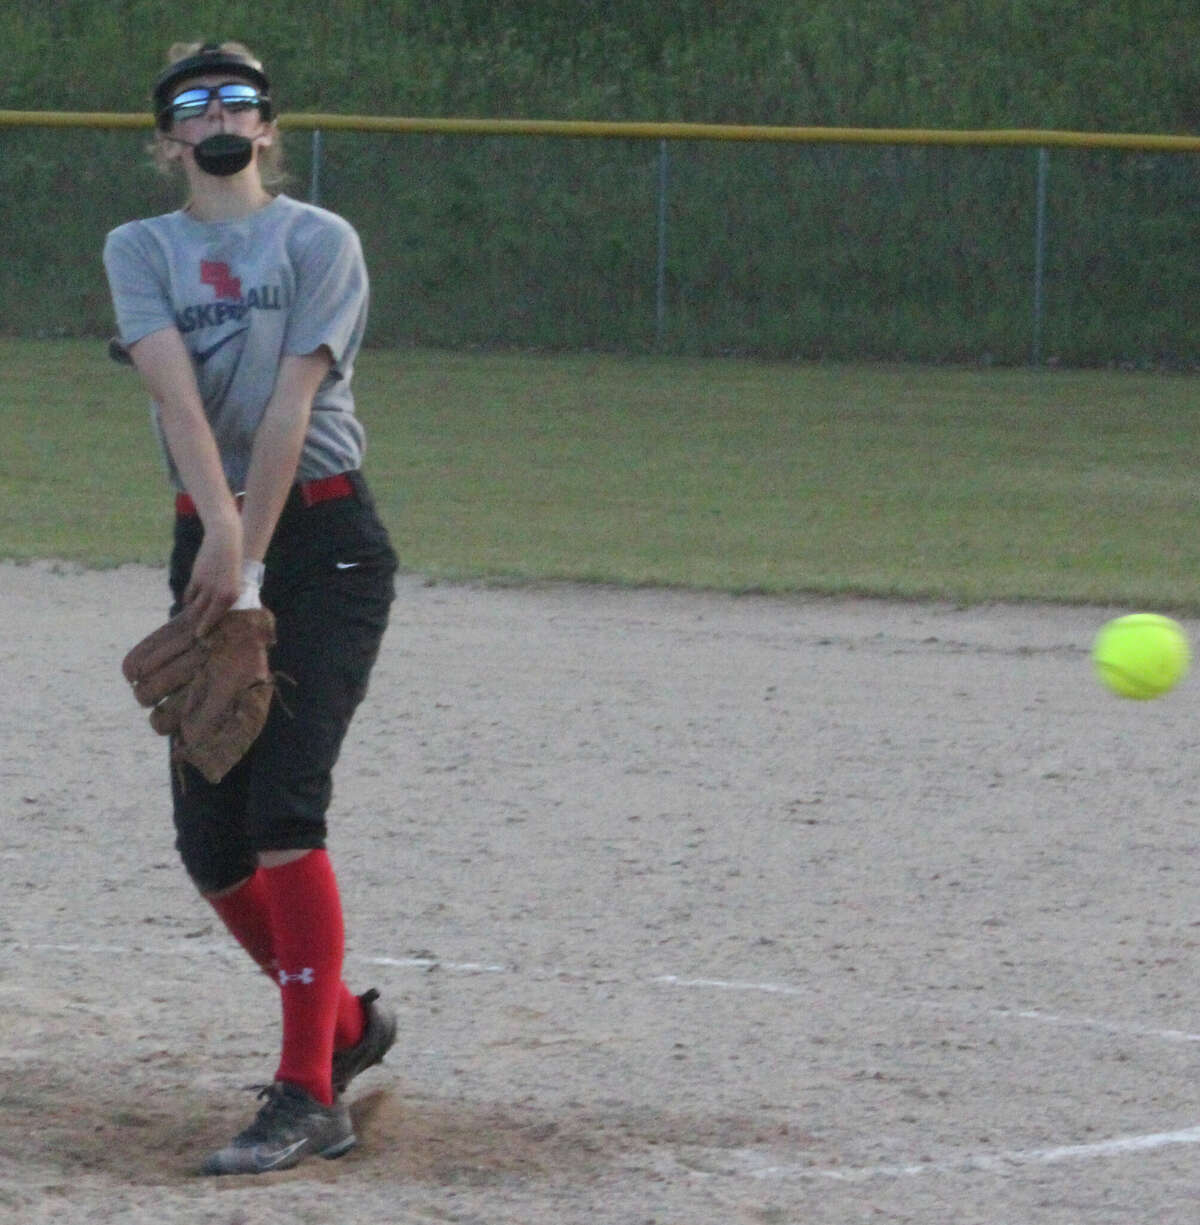 Cailin Knoop pitched for Big Rapids in the second game of a doubleheader on Tuesday.